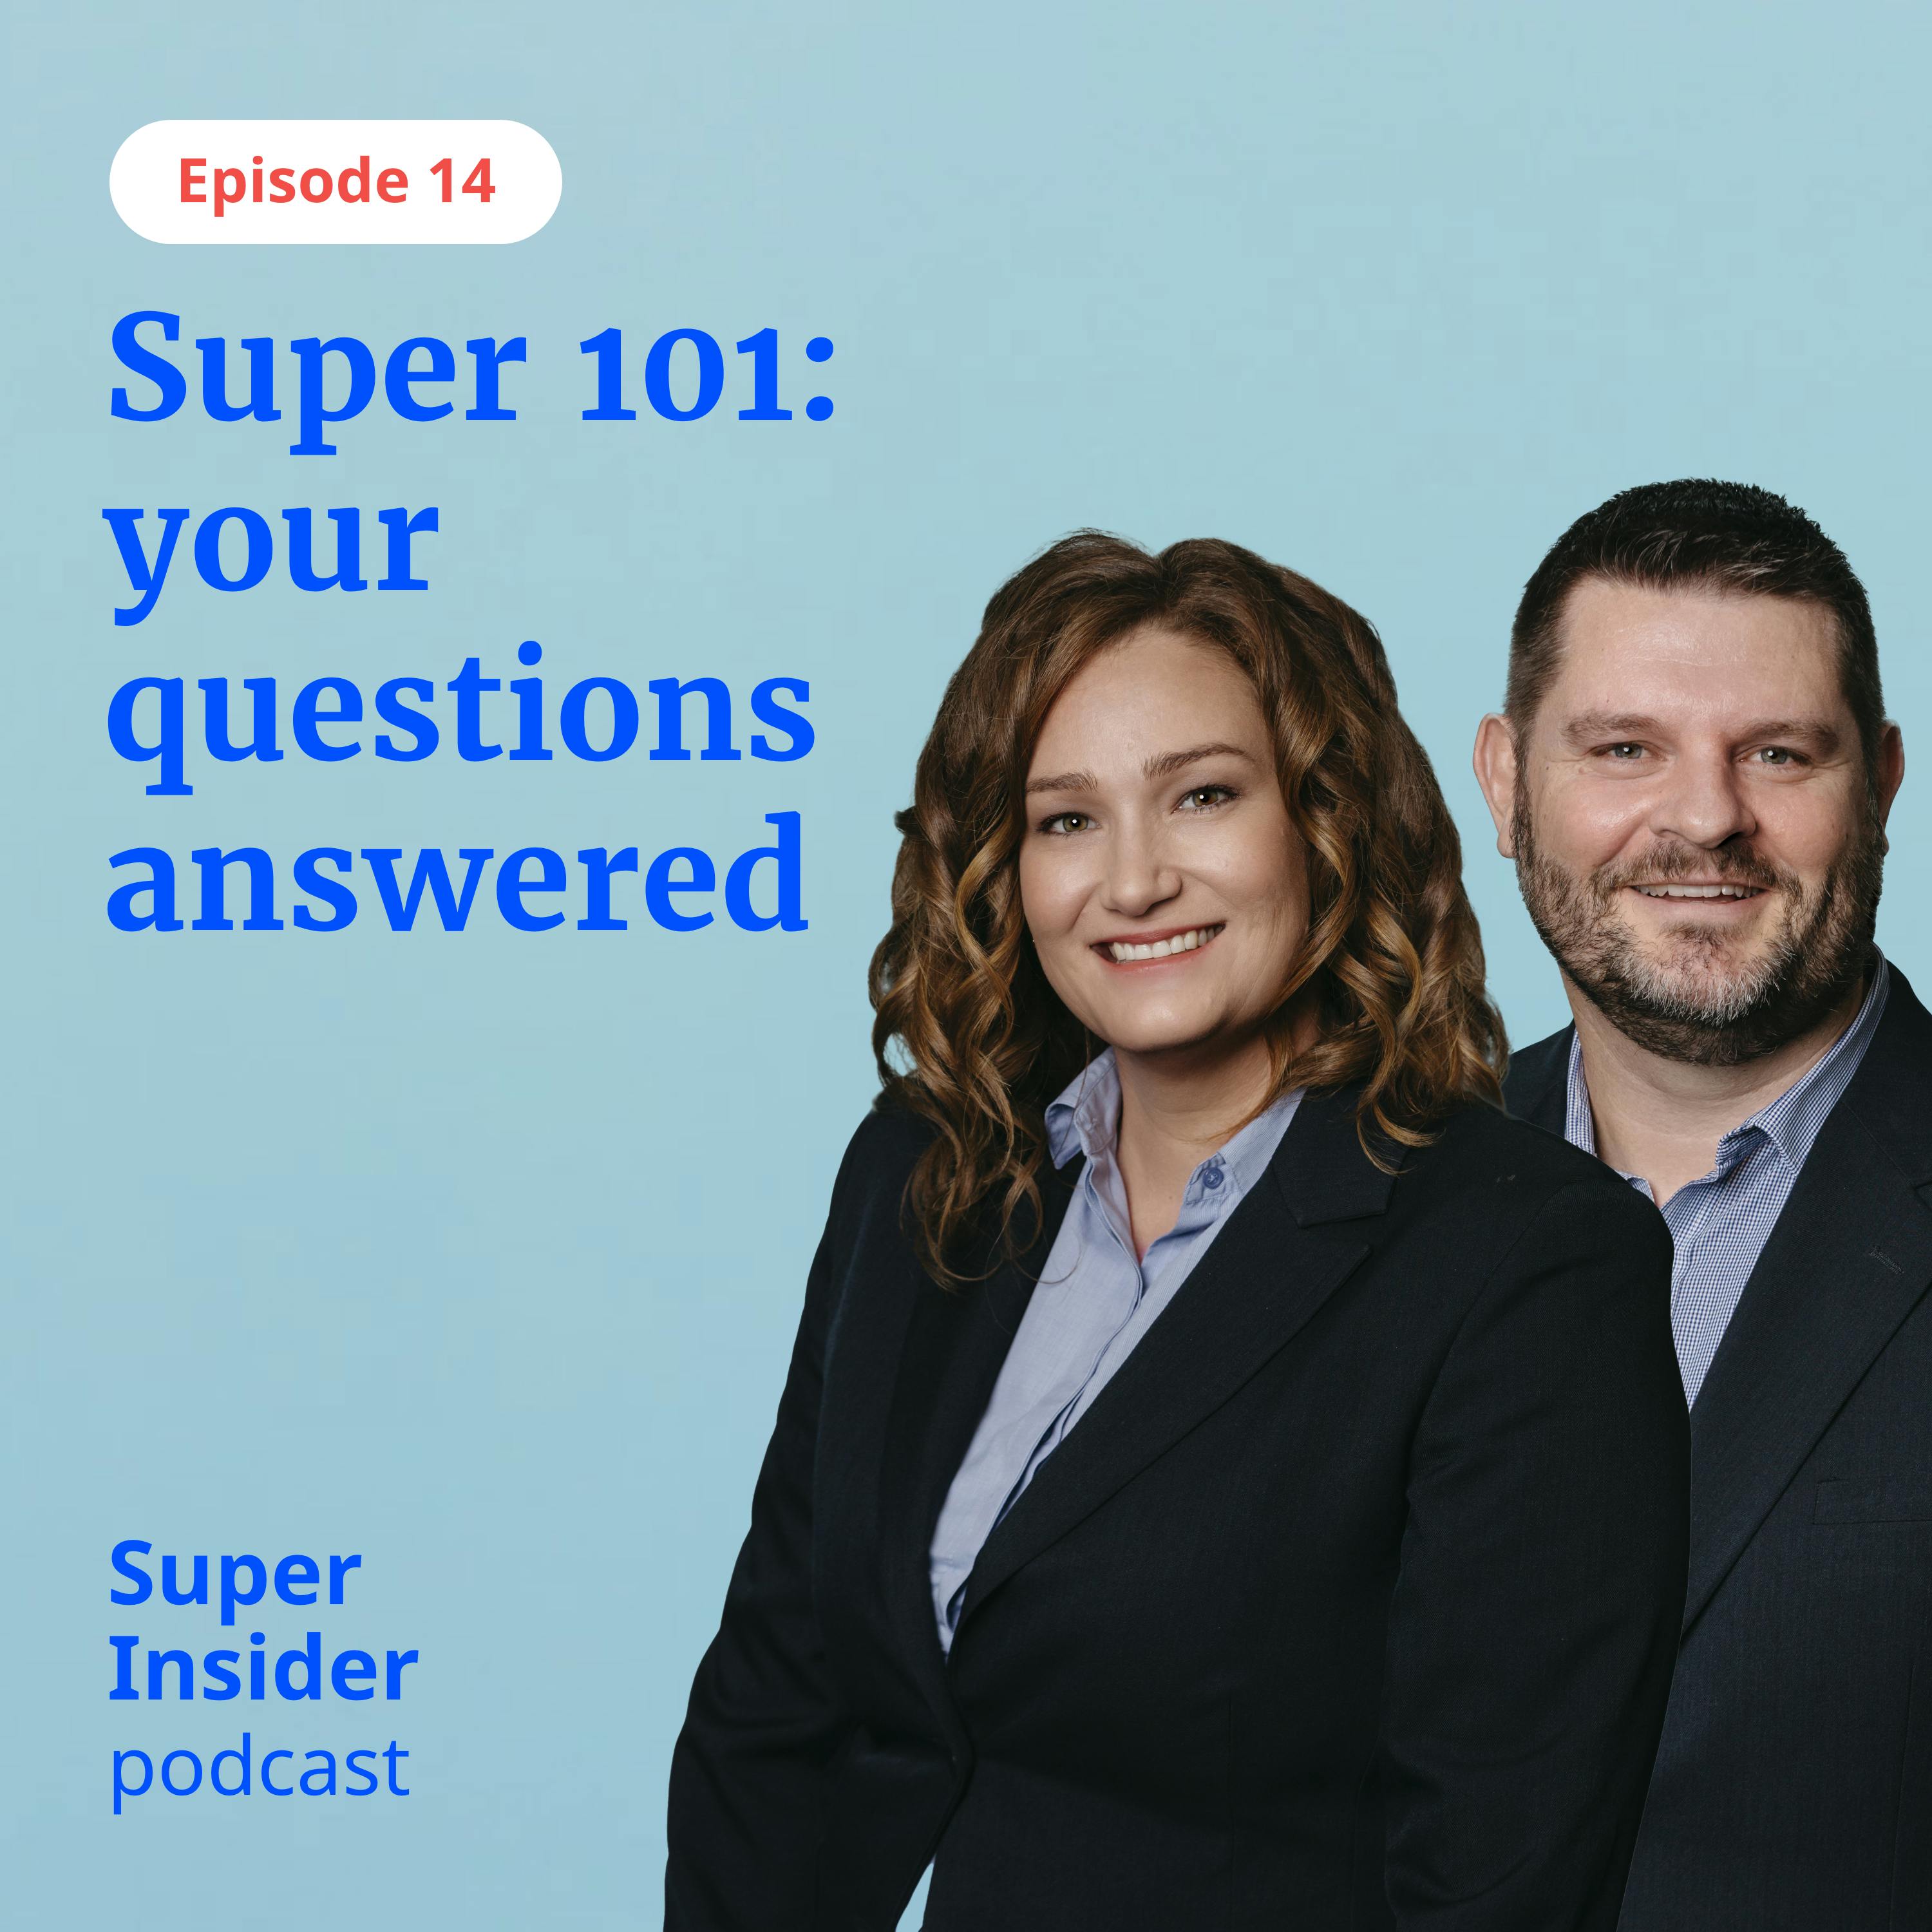 Super 101: your questions answered